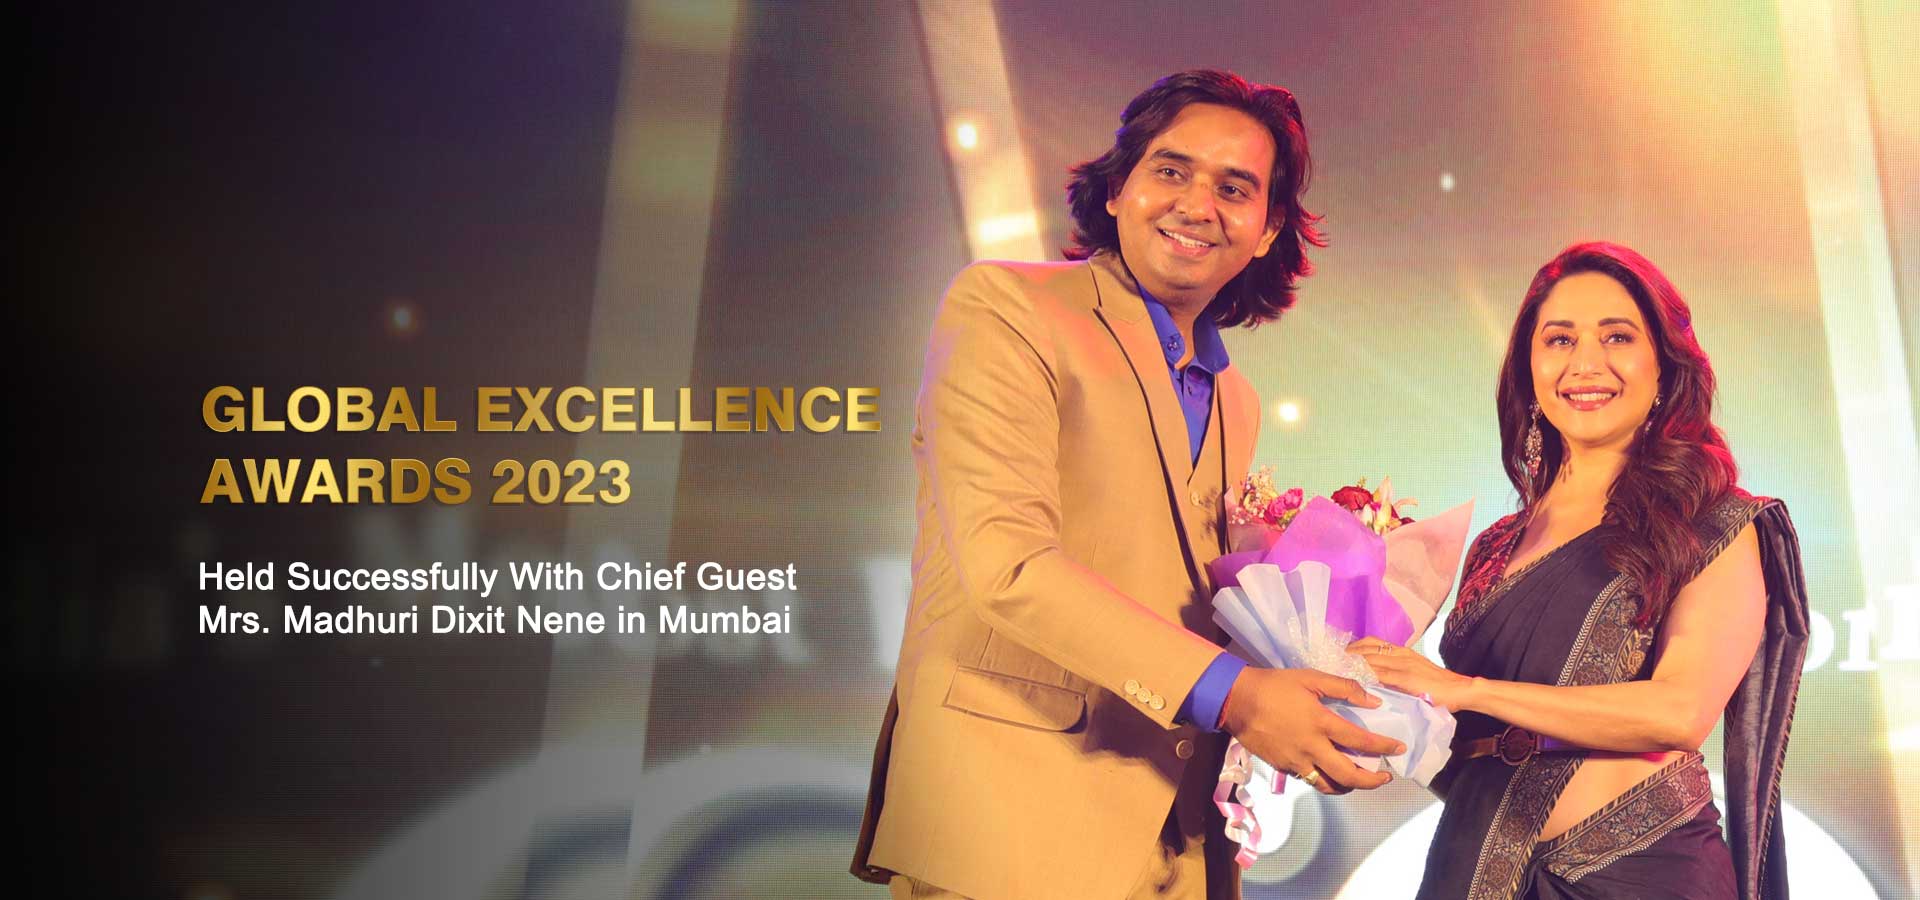 Global Excellence Awards 2023 Completed Successfully